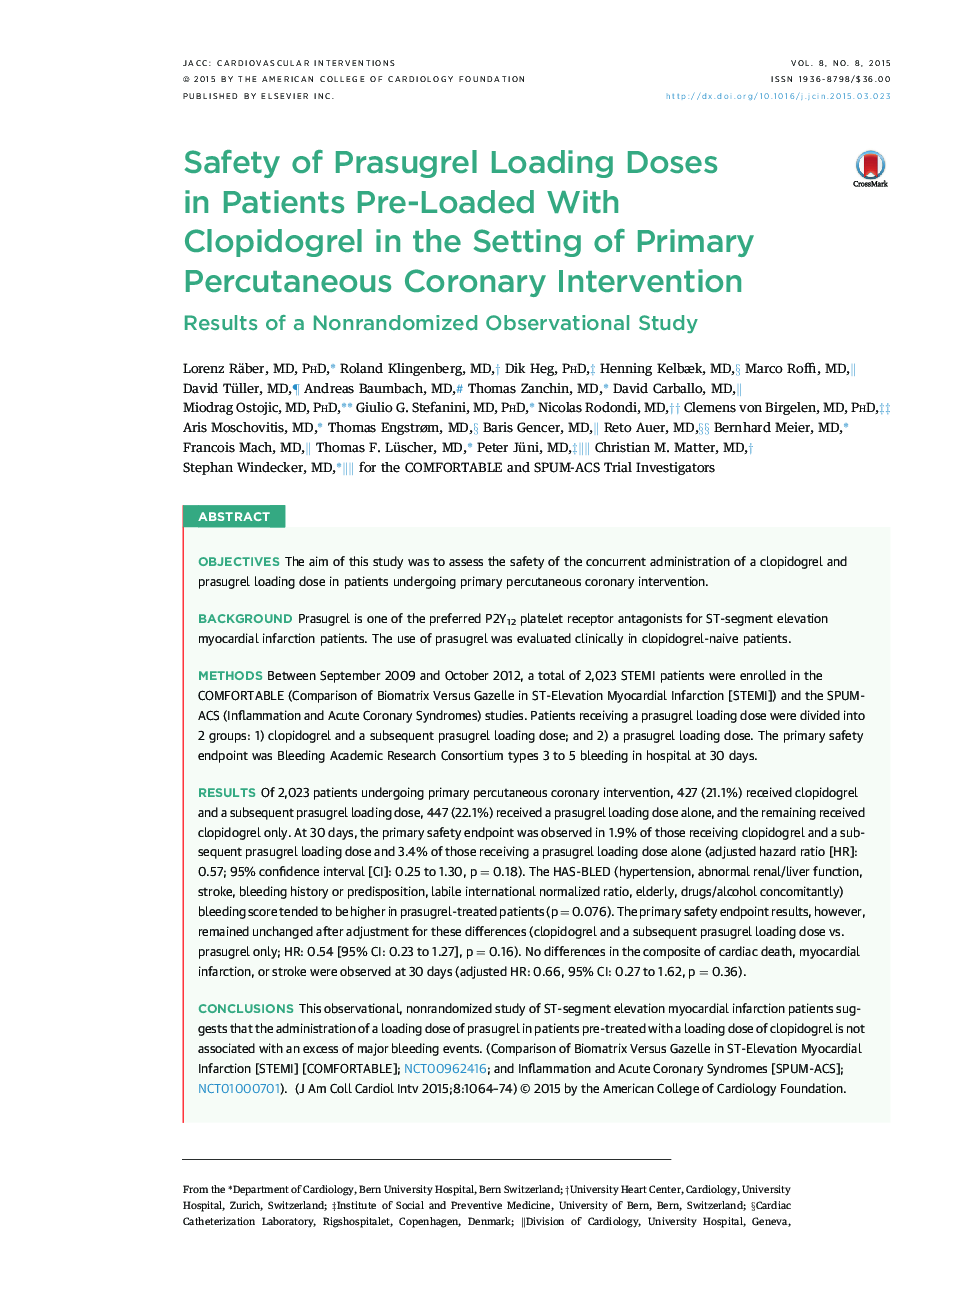 Safety of Prasugrel Loading Doses inÂ Patients Pre-Loaded With ClopidogrelÂ inÂ theÂ Setting of Primary Percutaneous Coronary Intervention: Results of a Nonrandomized Observational Study